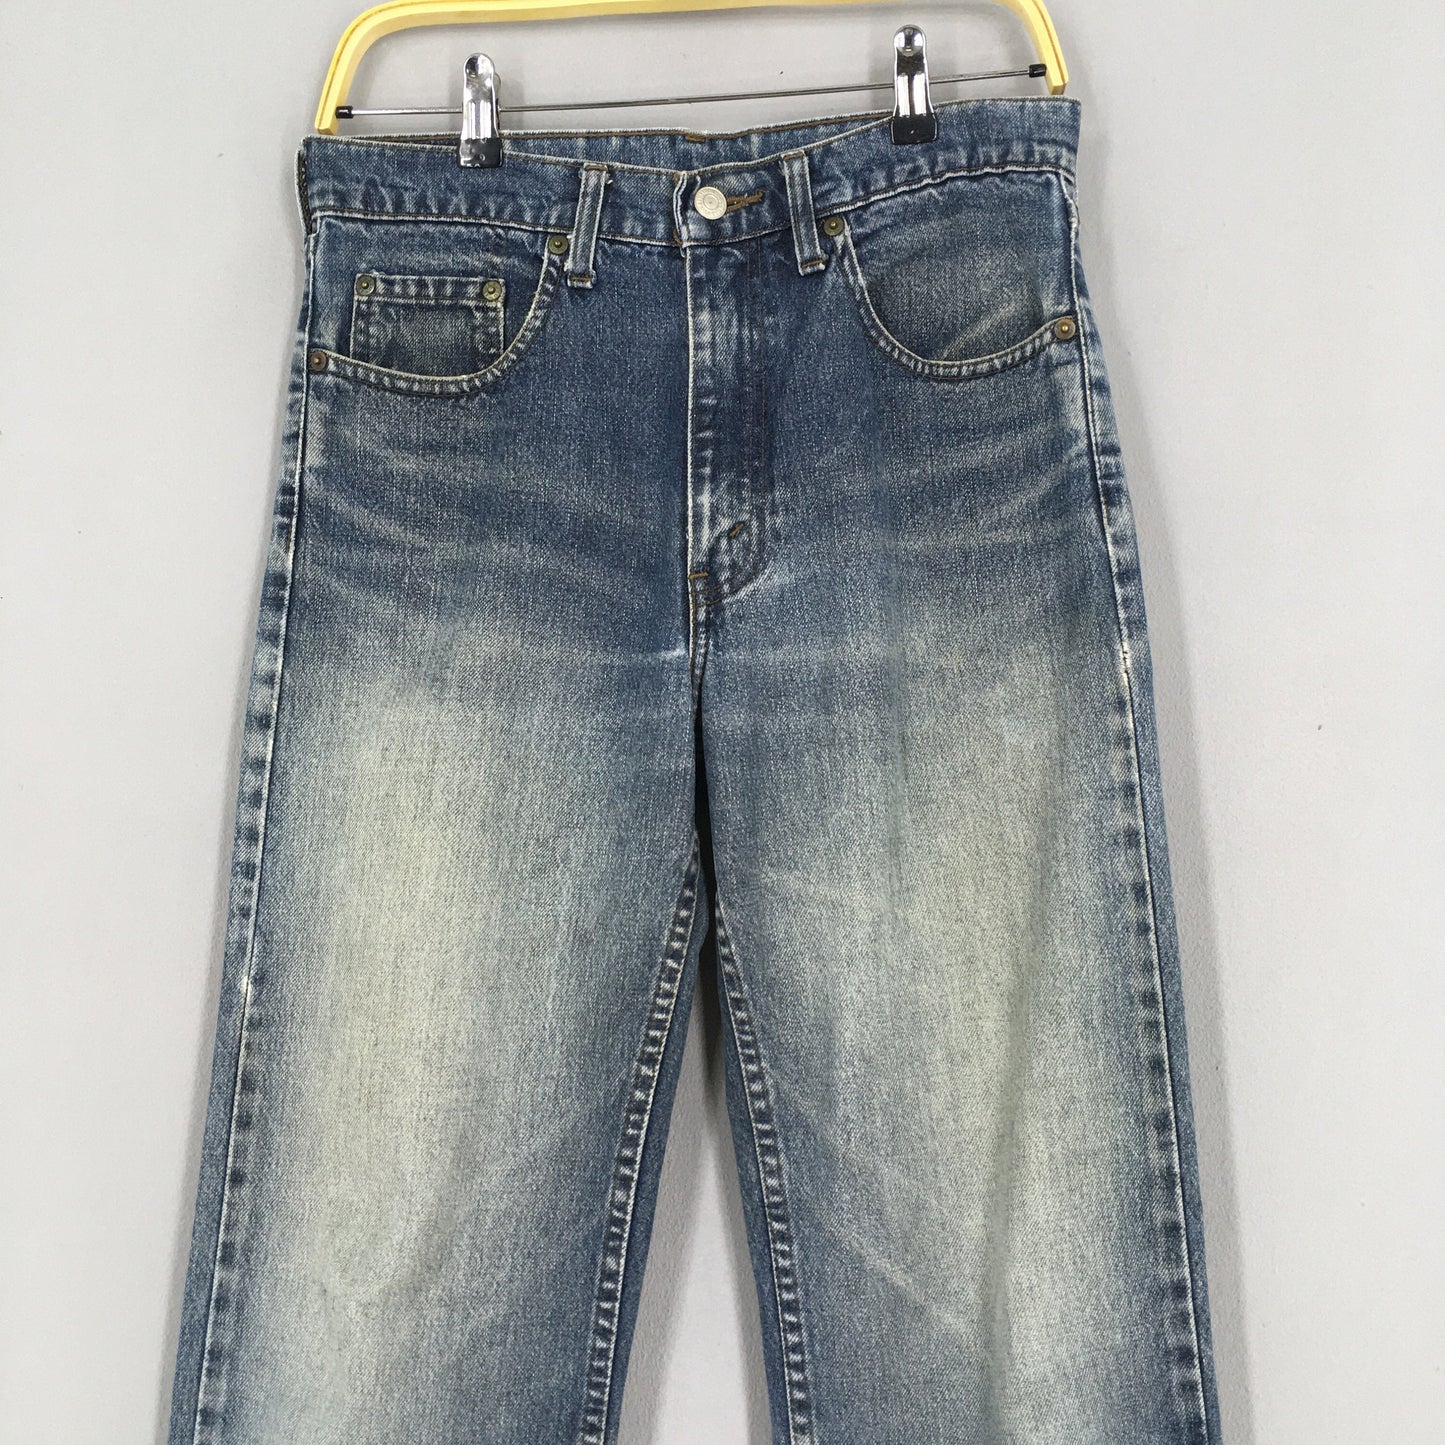 Levi's 509 Faded Blue Jeans Size 29x32